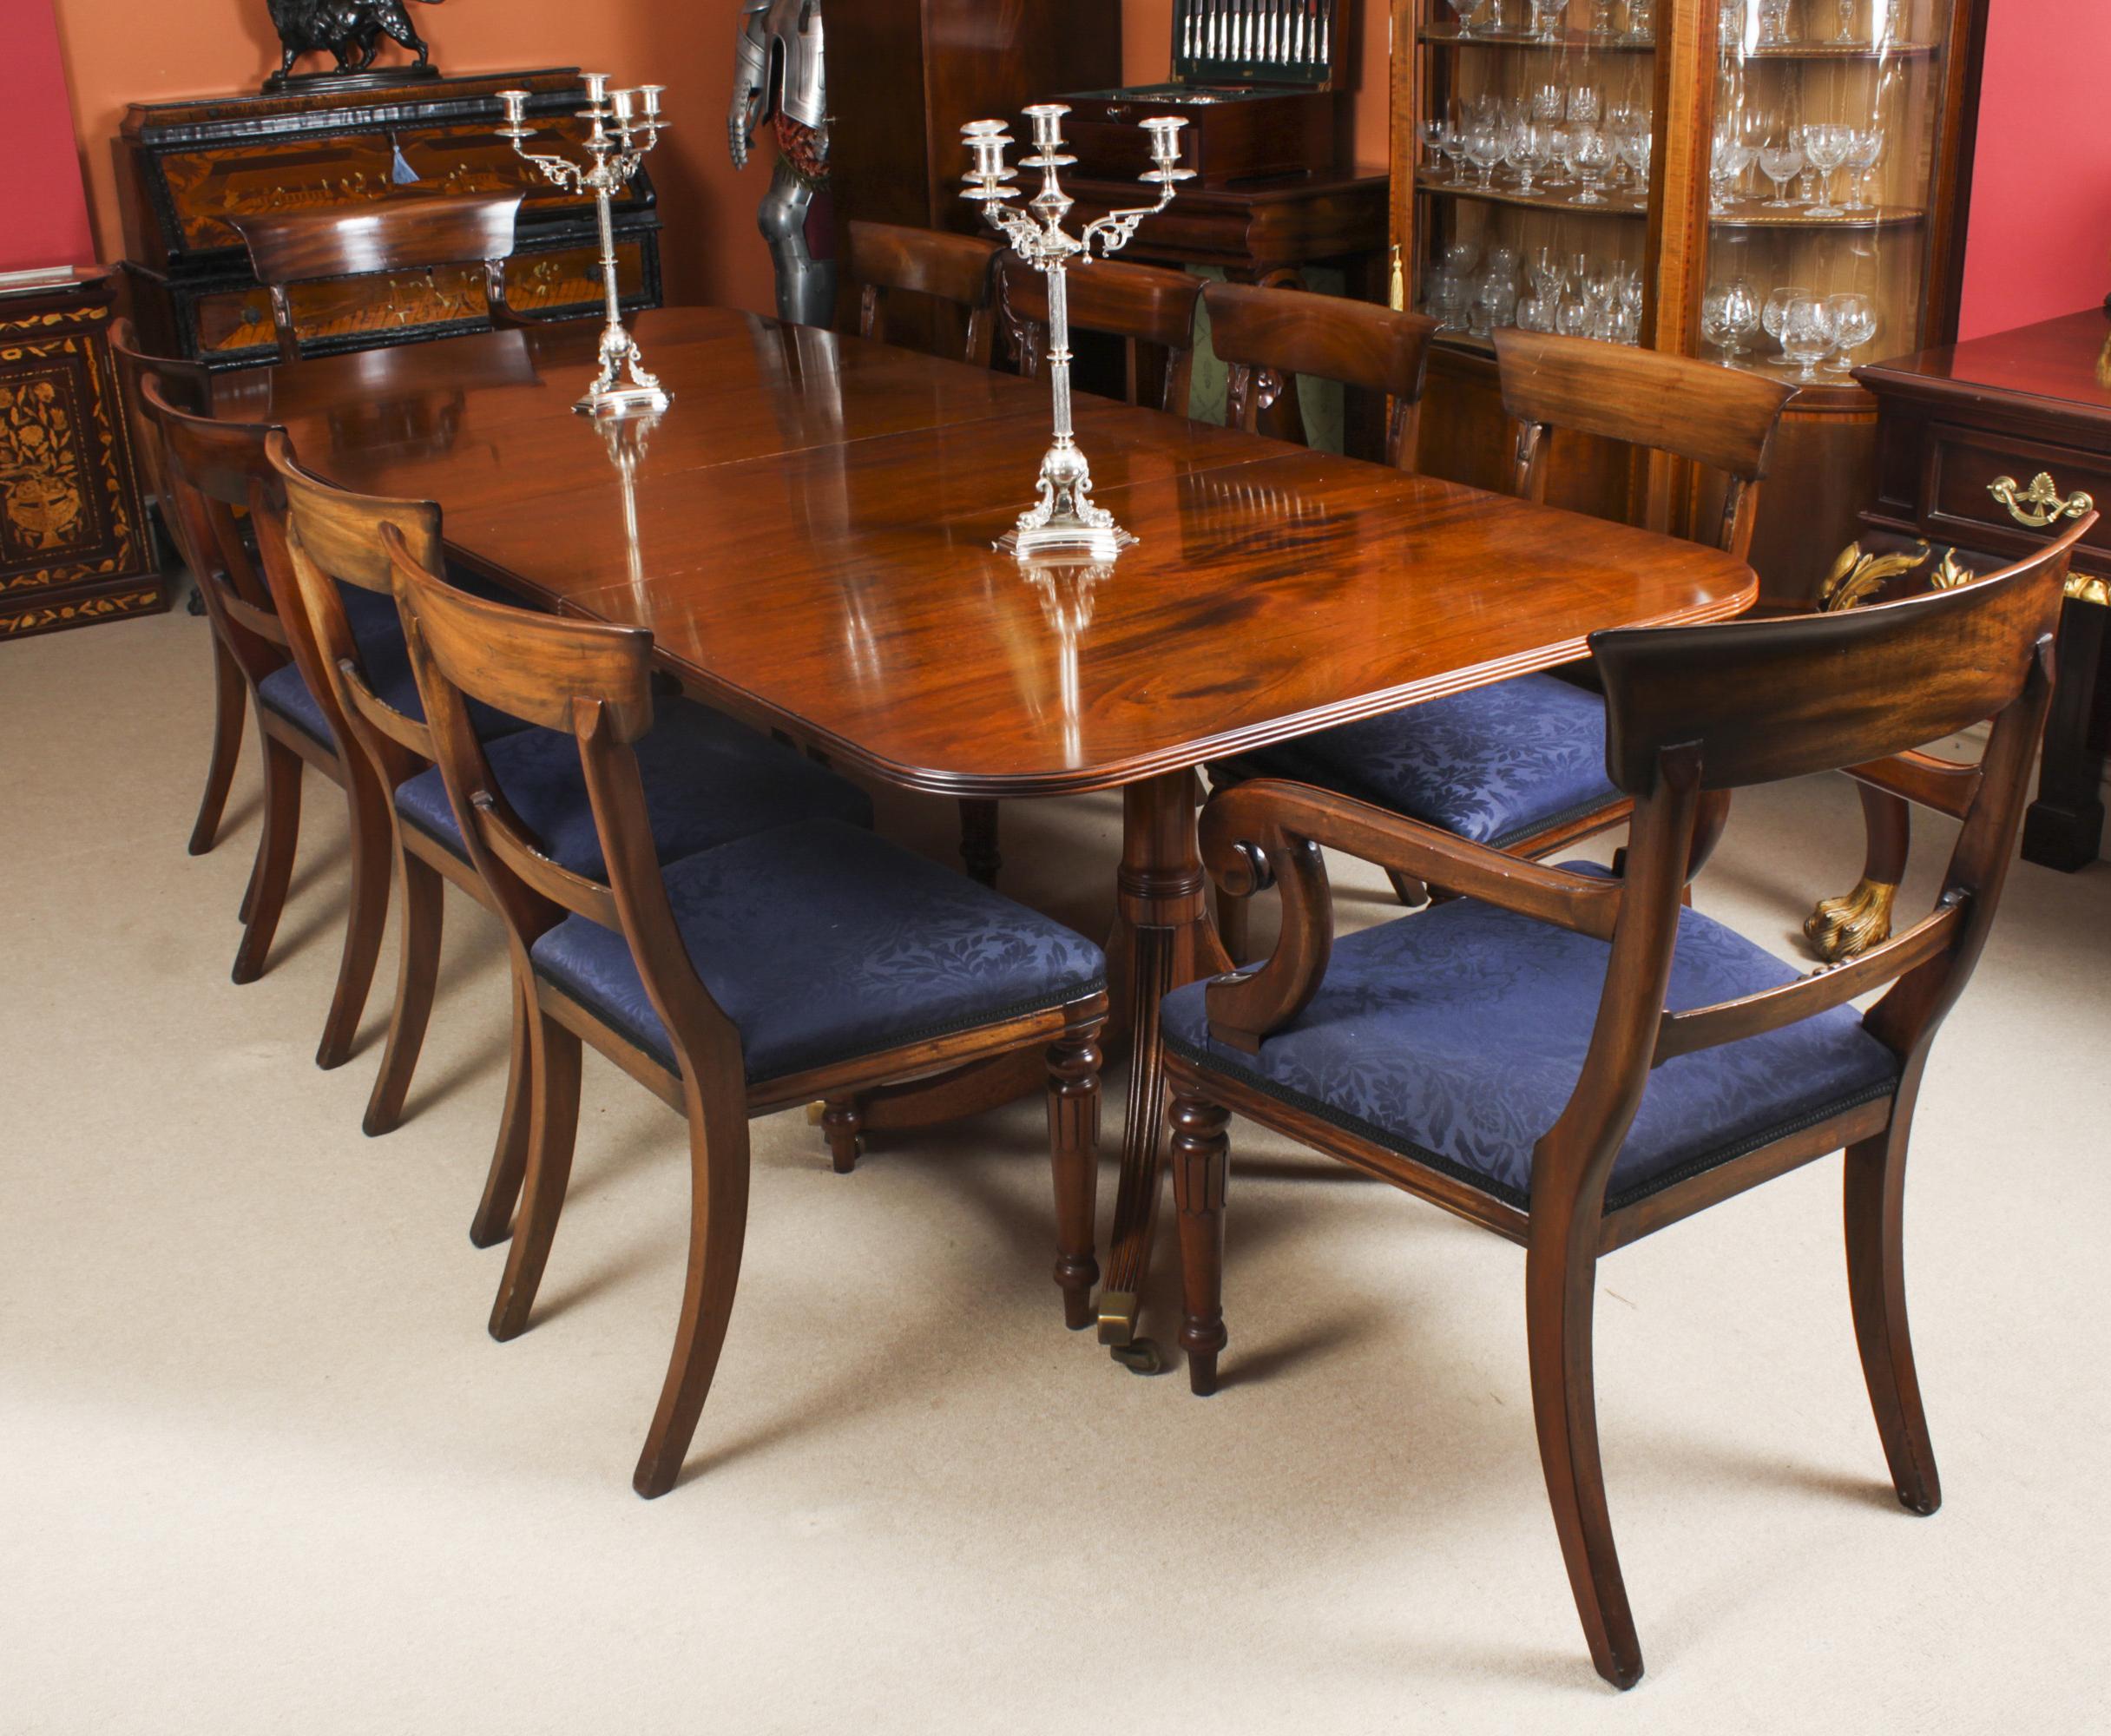 This is  a fabulous Vintage Regency Revival dining set comprising a  dining table and a set of ten bar back dining chairs, by William Tillman, Circa 1975 in date.

The table is made of stunning solid flame mahogany and is raised on twin 